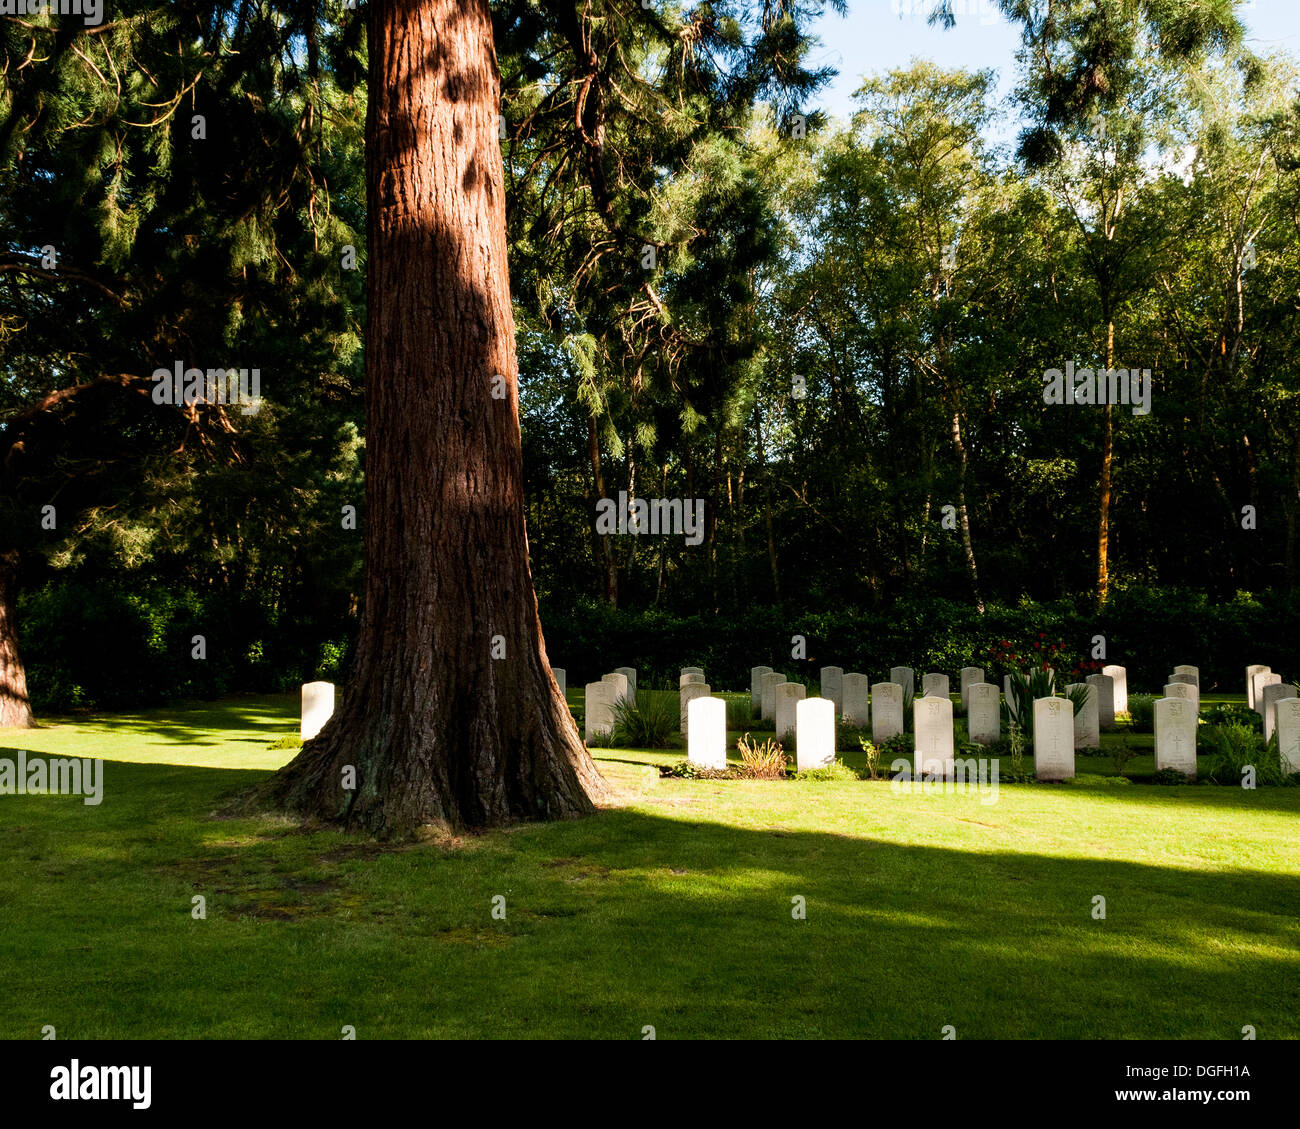 Brookwood Military Cemetery And Memorials, Brookwood, United Kingdom. Architect: Unknown, 2013. Stock Photo